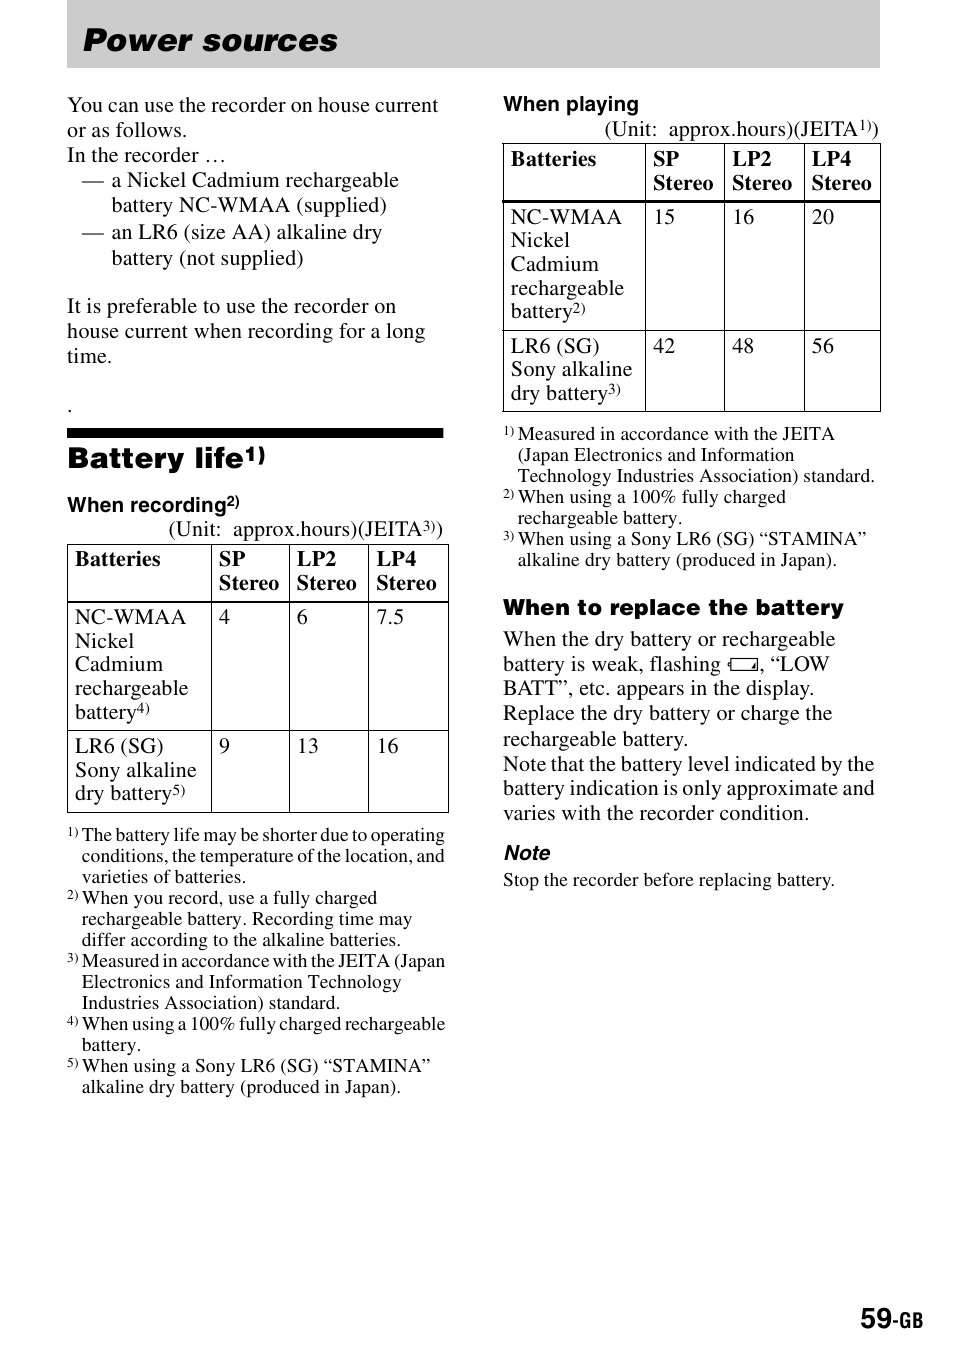 Power sources, Battery life | Sony MZ-N707 Manuel d'utilisation | Page 59 / 160